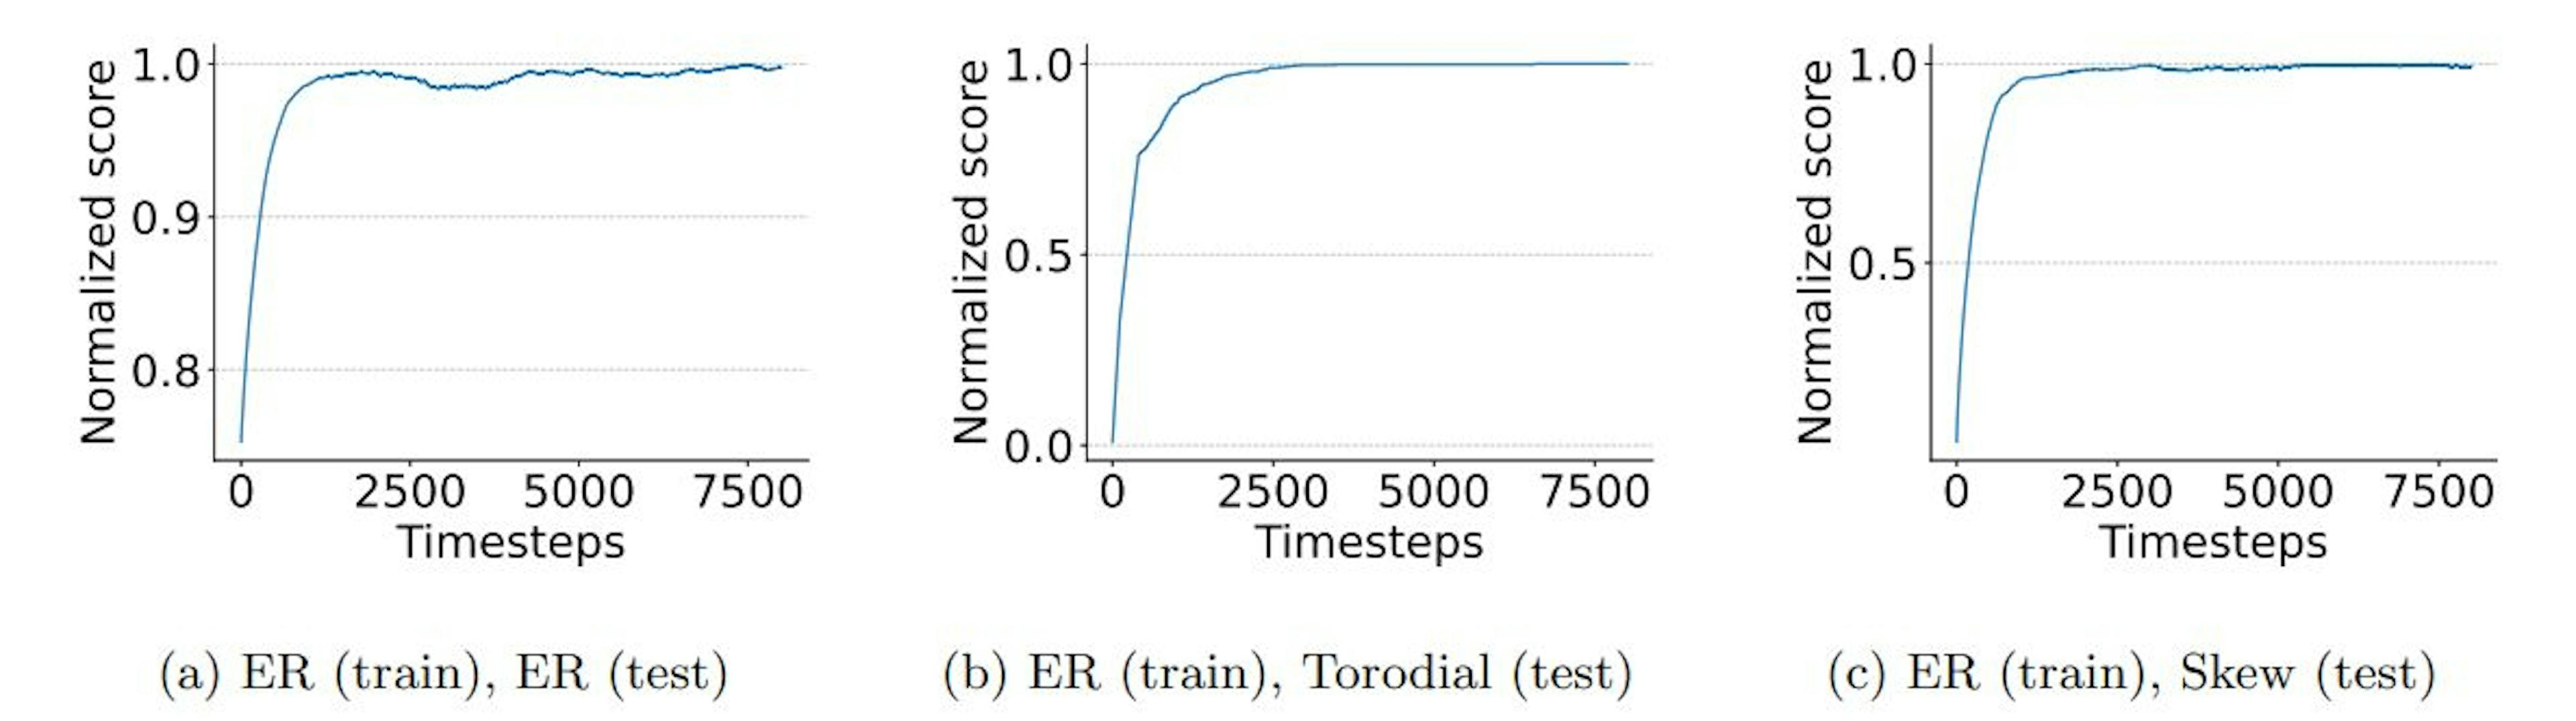 Figure 7: Score of SoftTabu agents on a random graph from three distributions with |V | = 2000 from GSET Dataset, Trained on ER with |V | = 200.